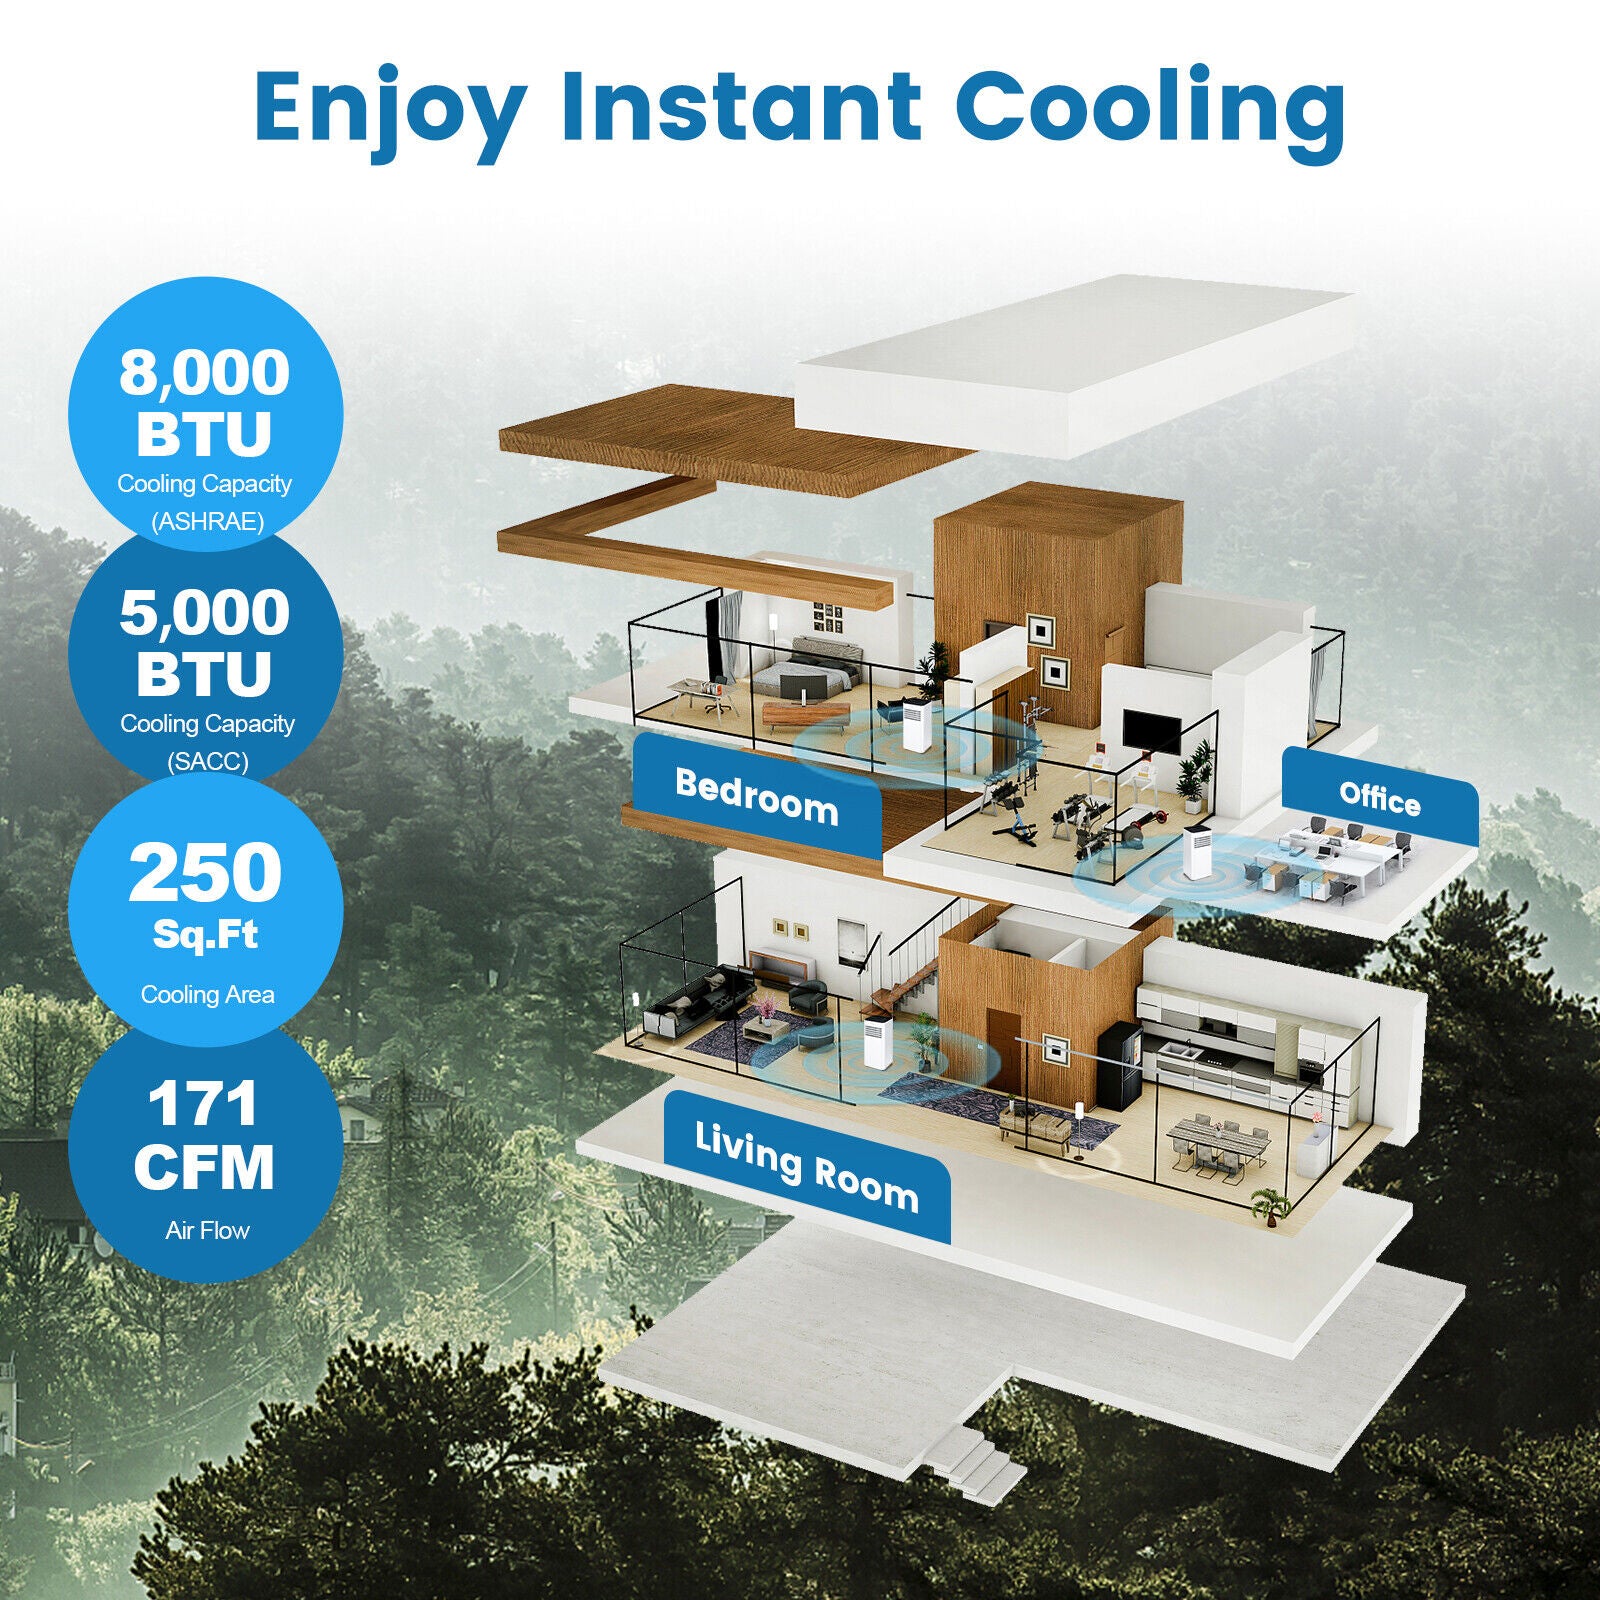 Wide range of applications: The installation is very simple, one person can complete the whole installation. It only takes a few seconds to start cooling and deliver cold air. It has a wide range of application scenarios and can be used in bedrooms, living rooms, and office areas. Bring your coolness in the dry and hot seasons.